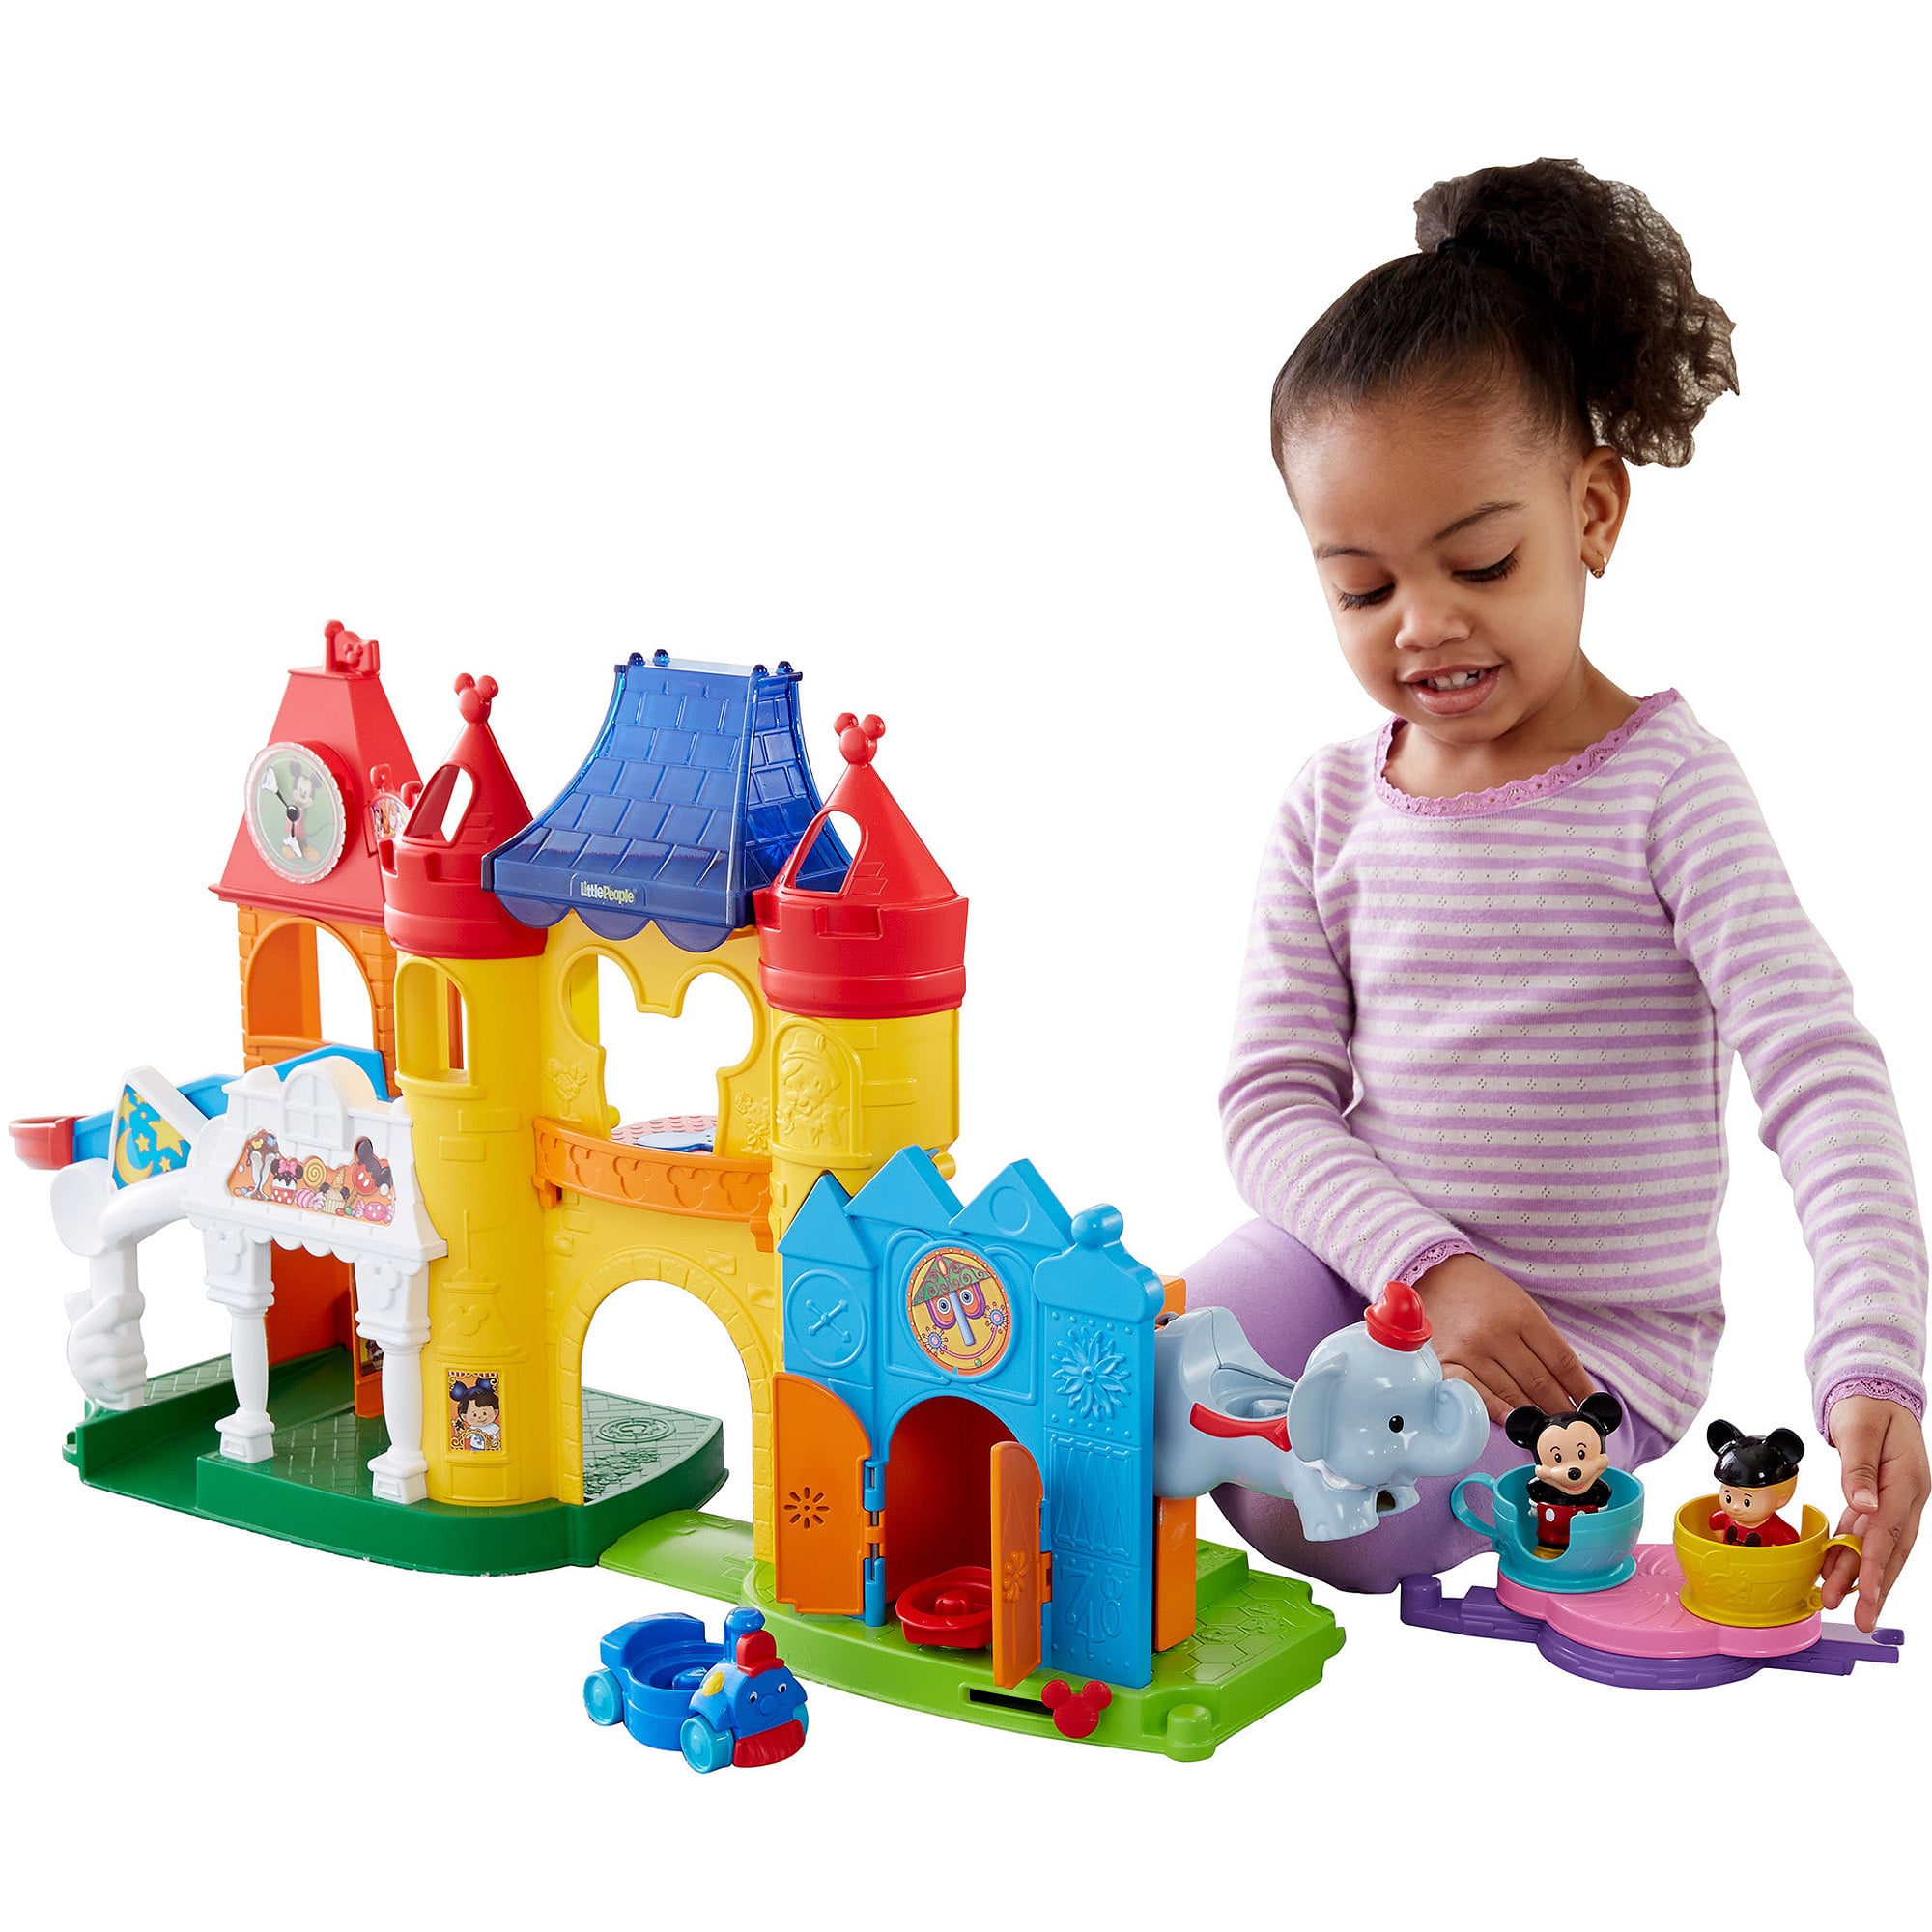 fisher price little people 2019